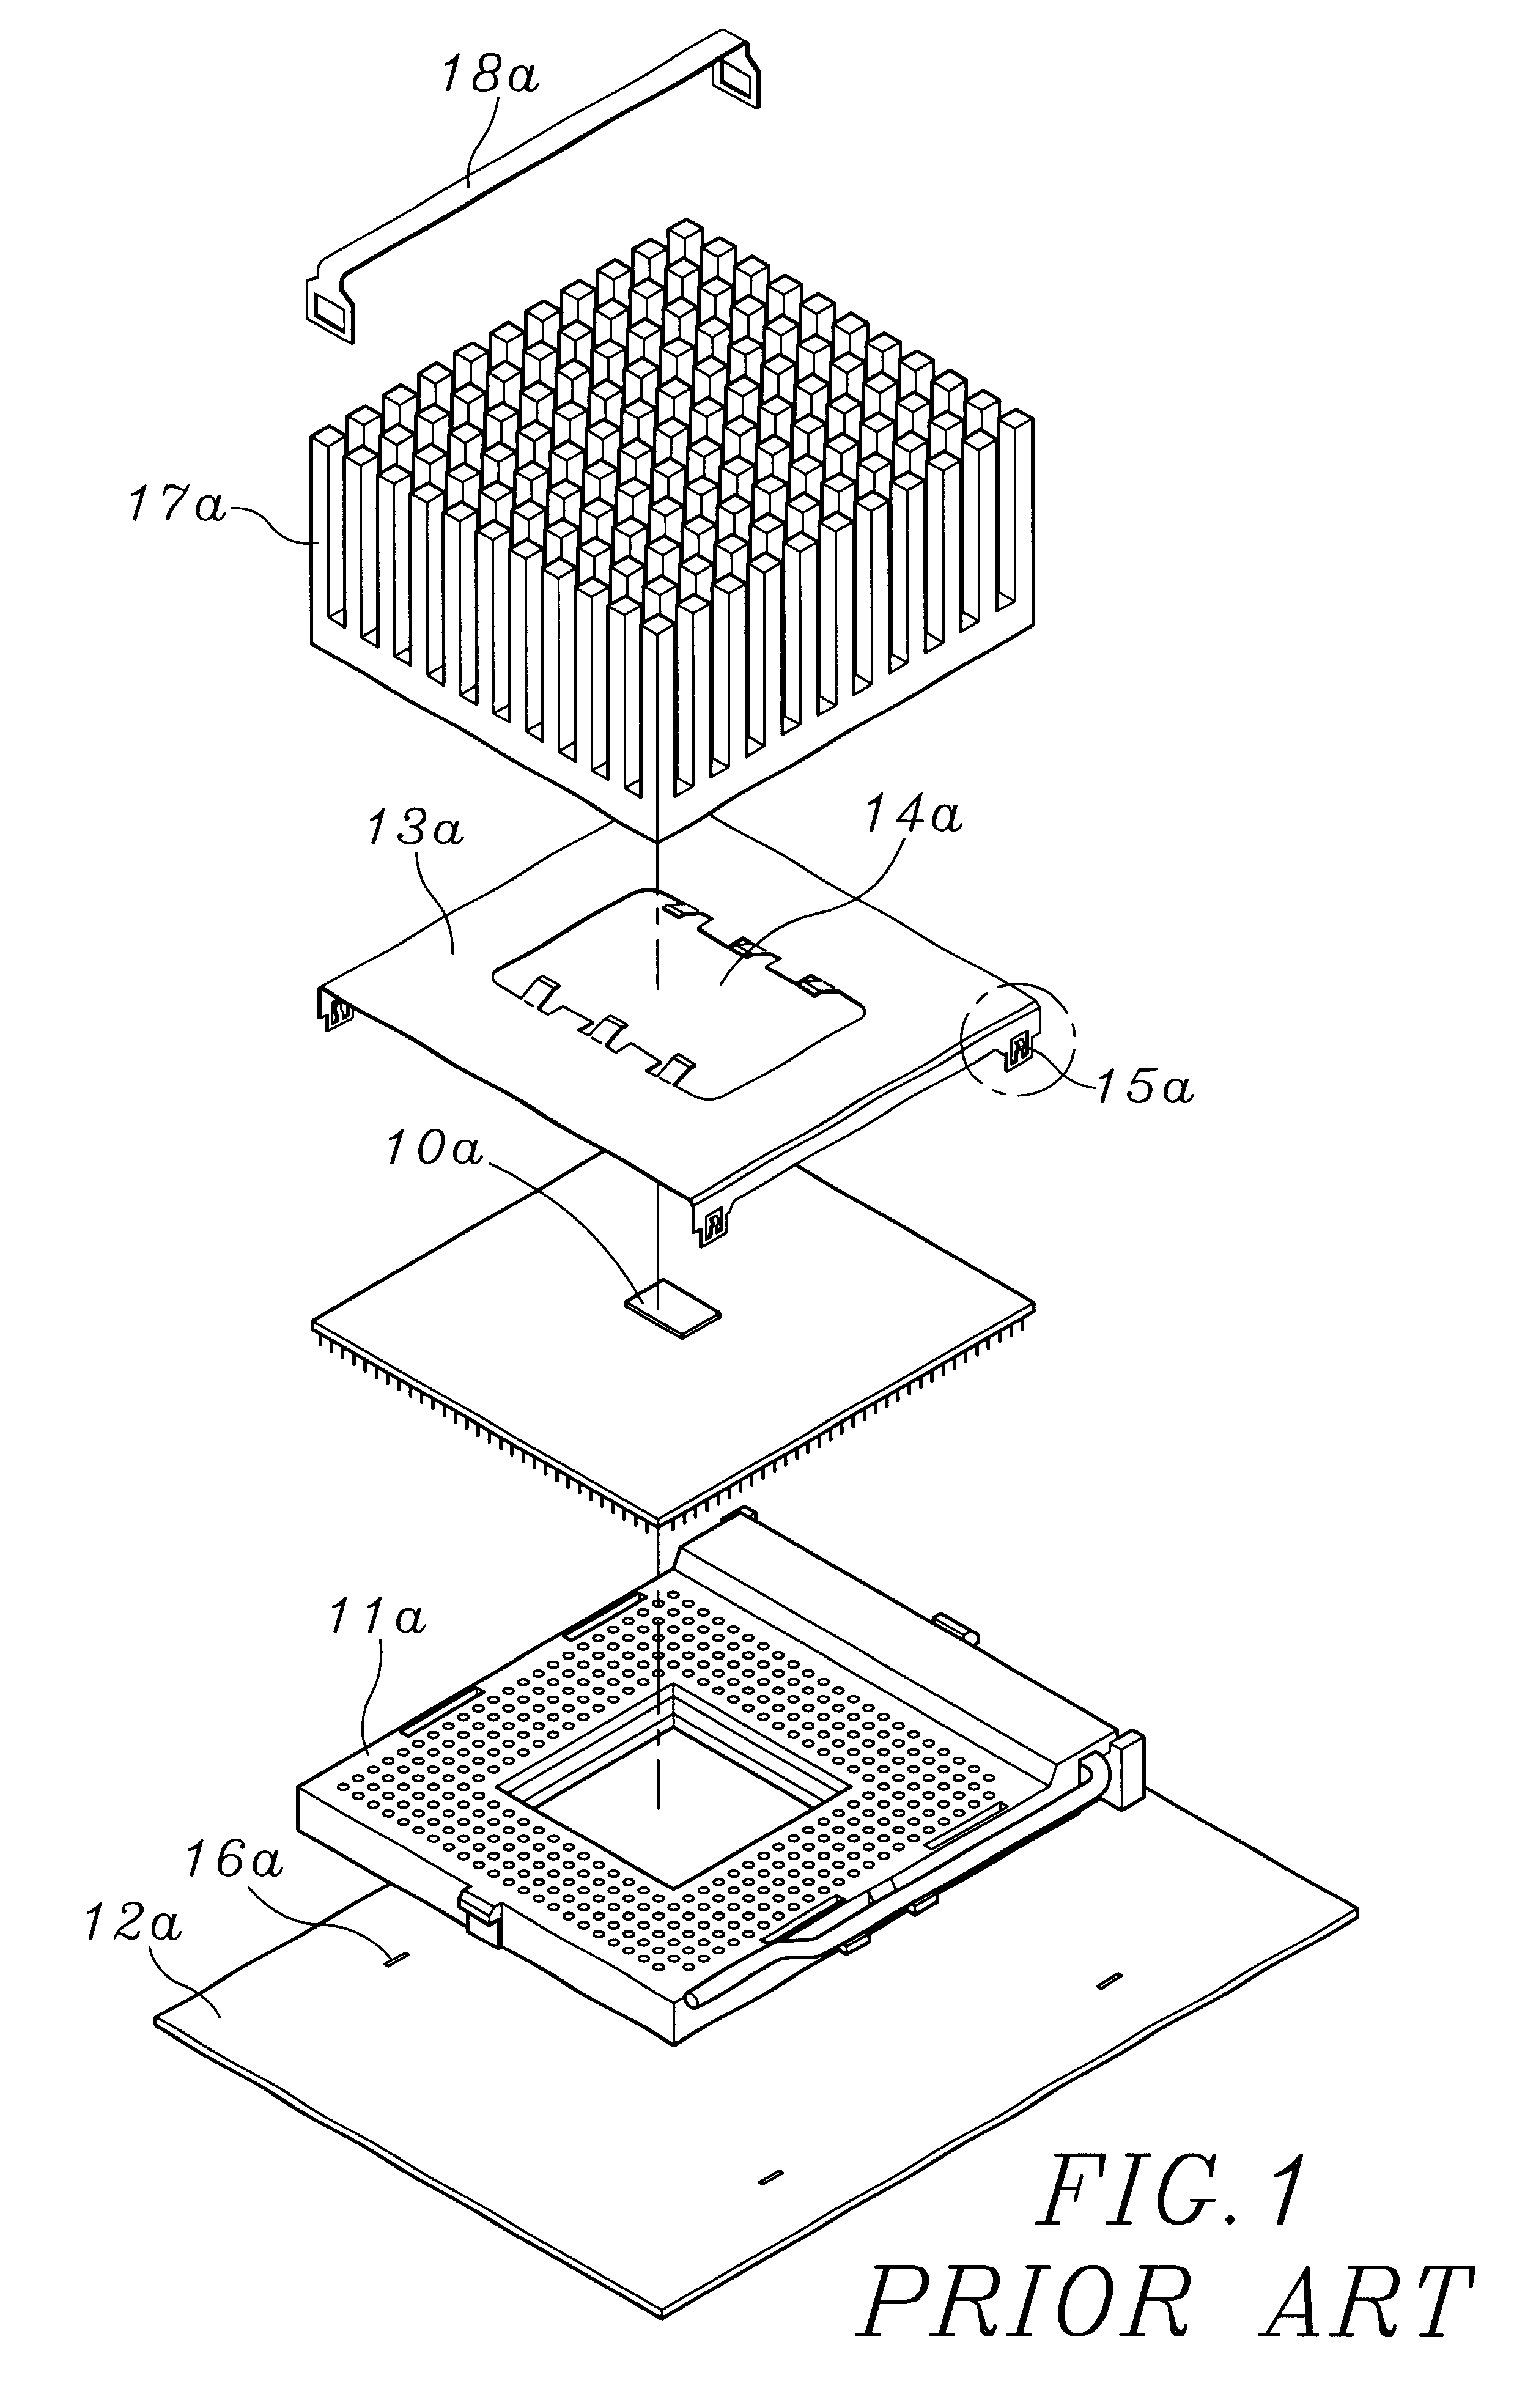 Modified structure for preventing electromagnetic interference of central processing unit